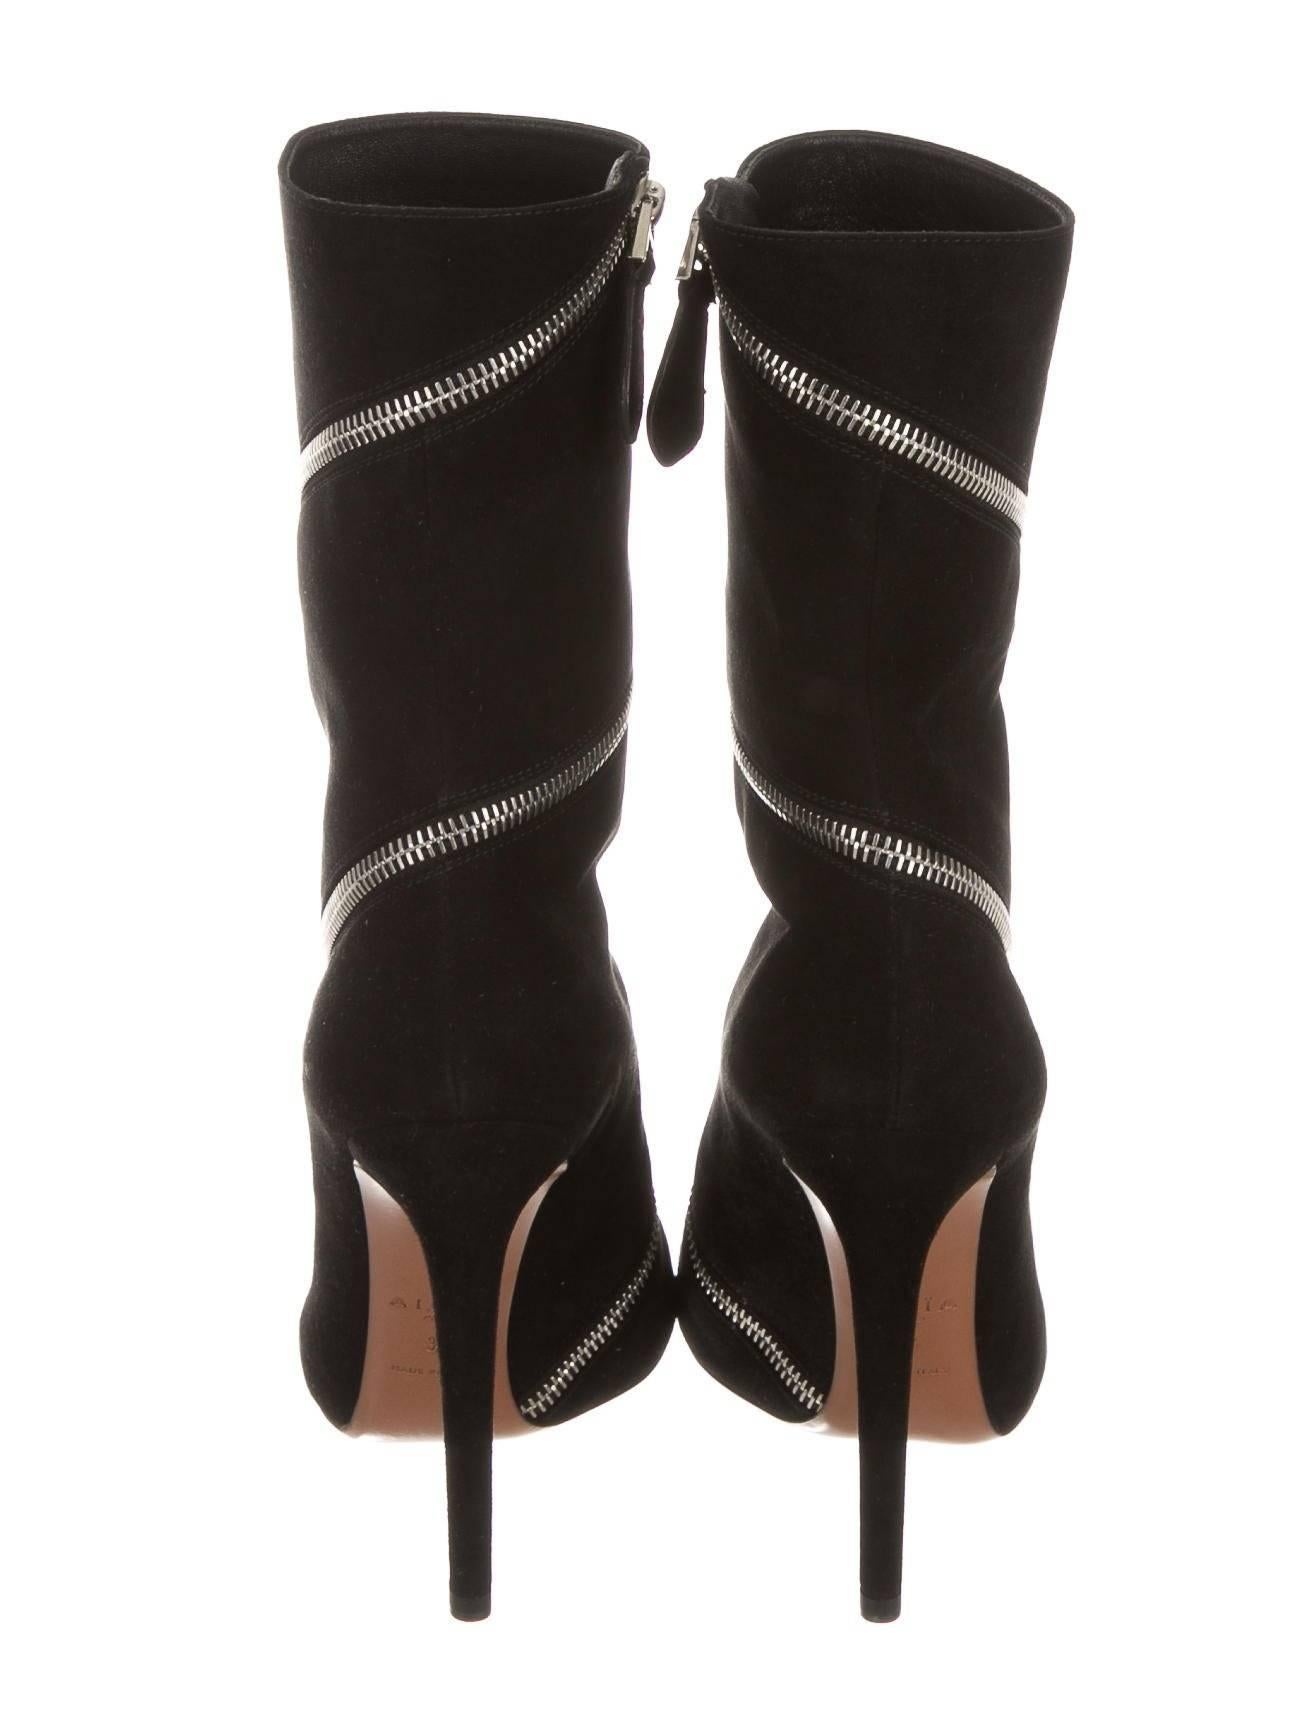 Women's Alaia New Black Suede Silver Zip Around Evening Ankle Boots Heels in Box